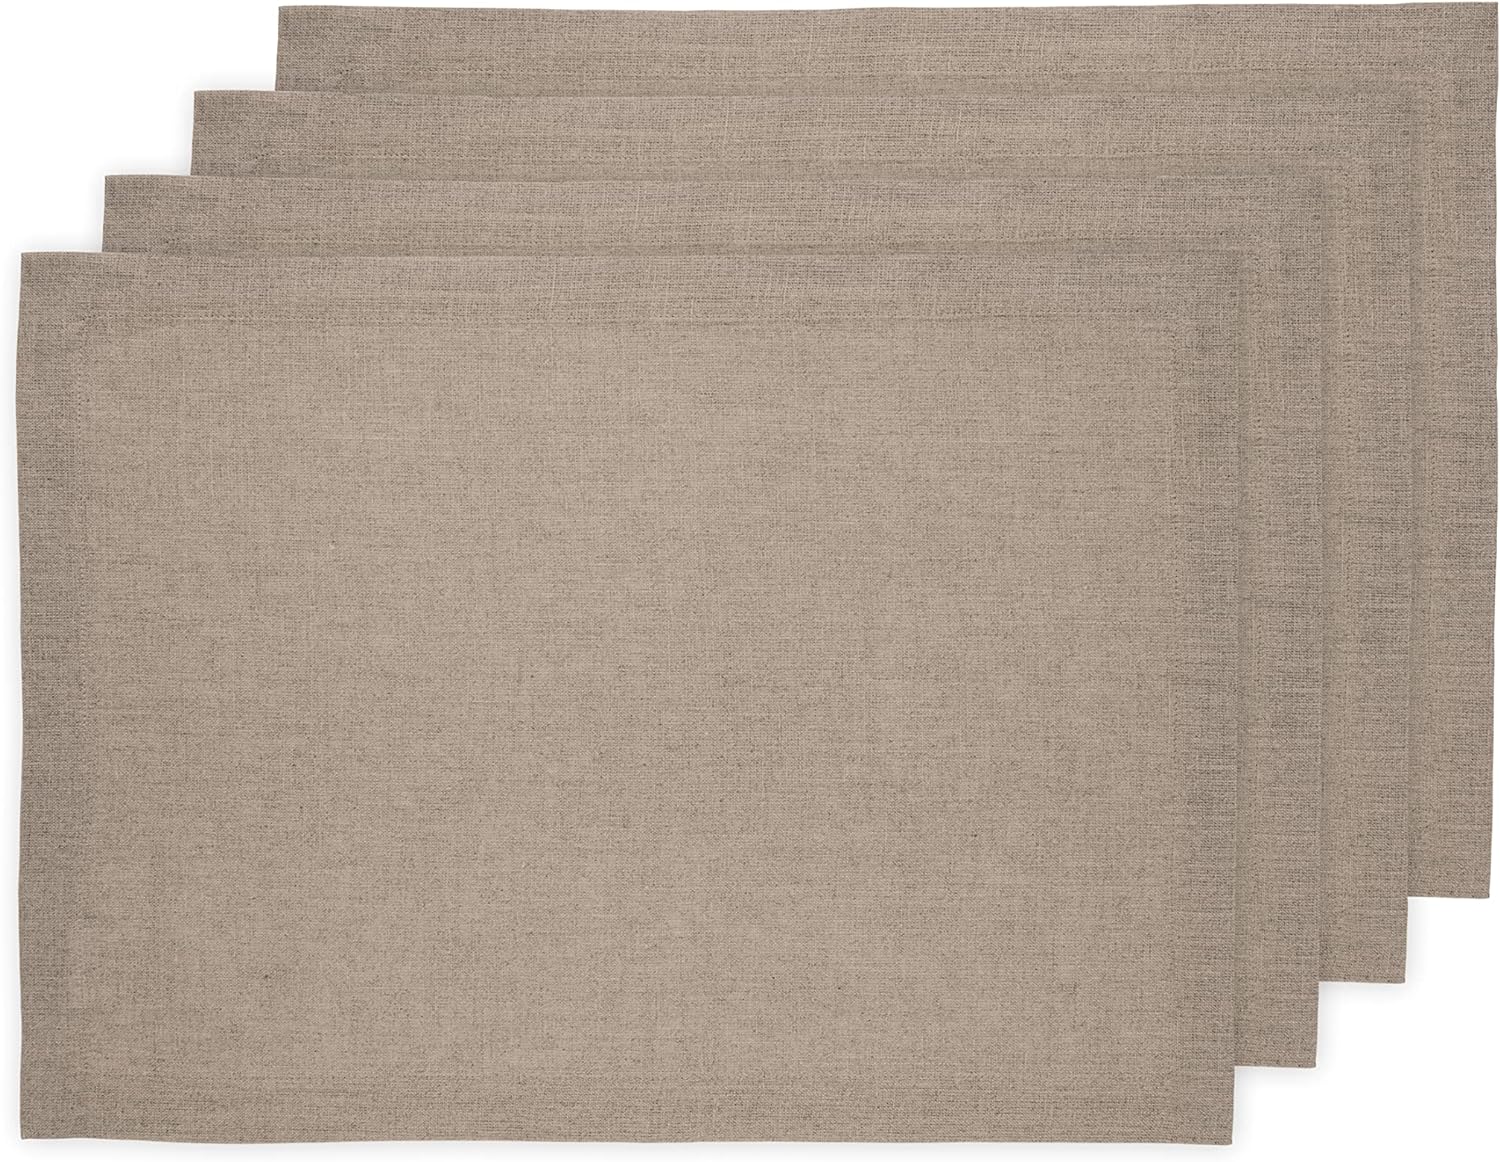 Solino Home Rustic Linen Placemats Set of 4 – 100% Pure Linen Natural Placemats 14 x 19 Inch – Machine Washable Christmas Placemats – Fete, Handcrafted from European Flax